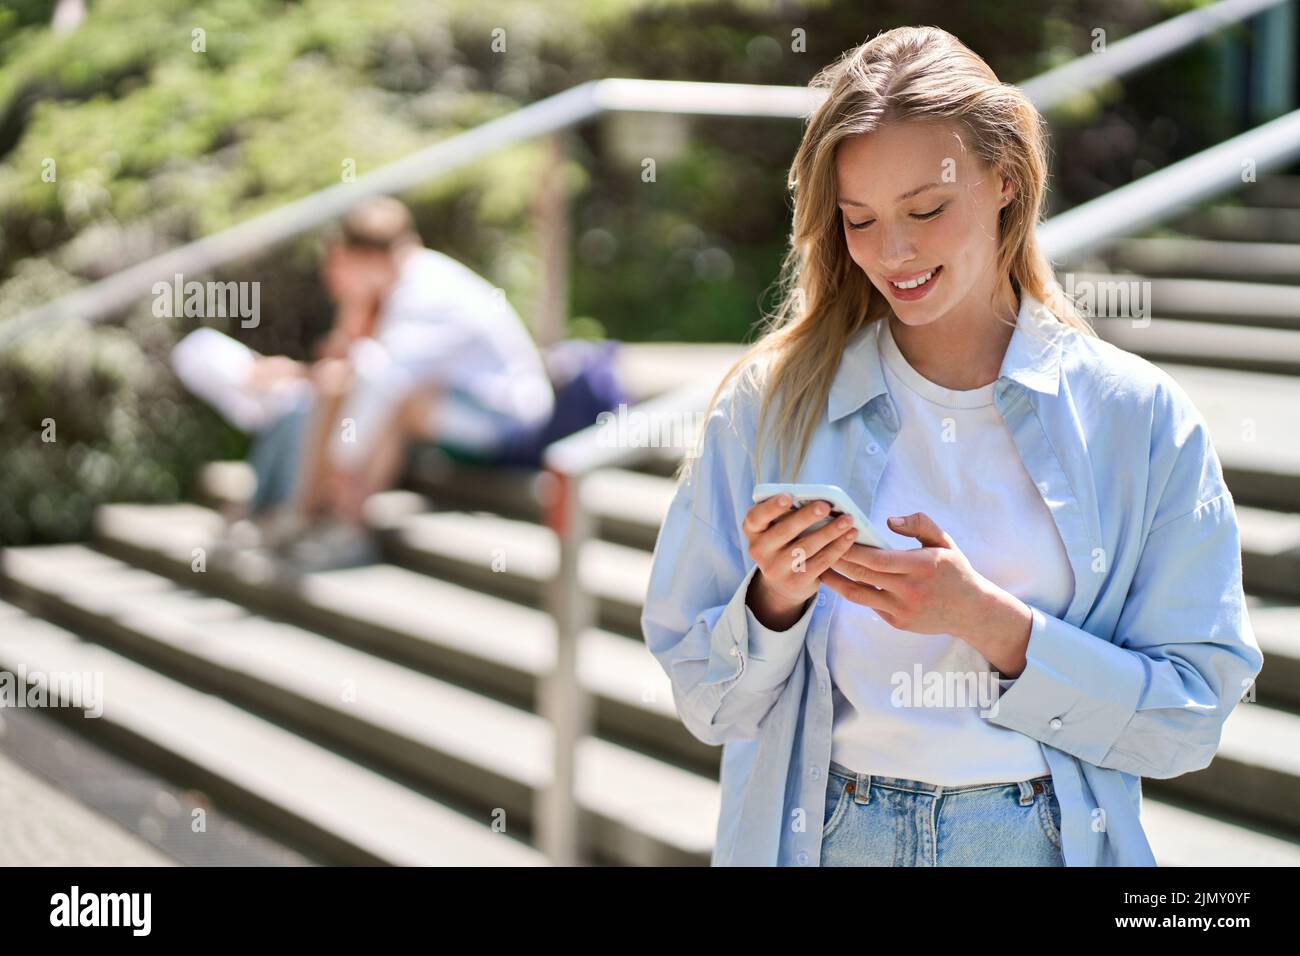 Young smiling woman university student using cellphone standing outdoors. Stock Photo